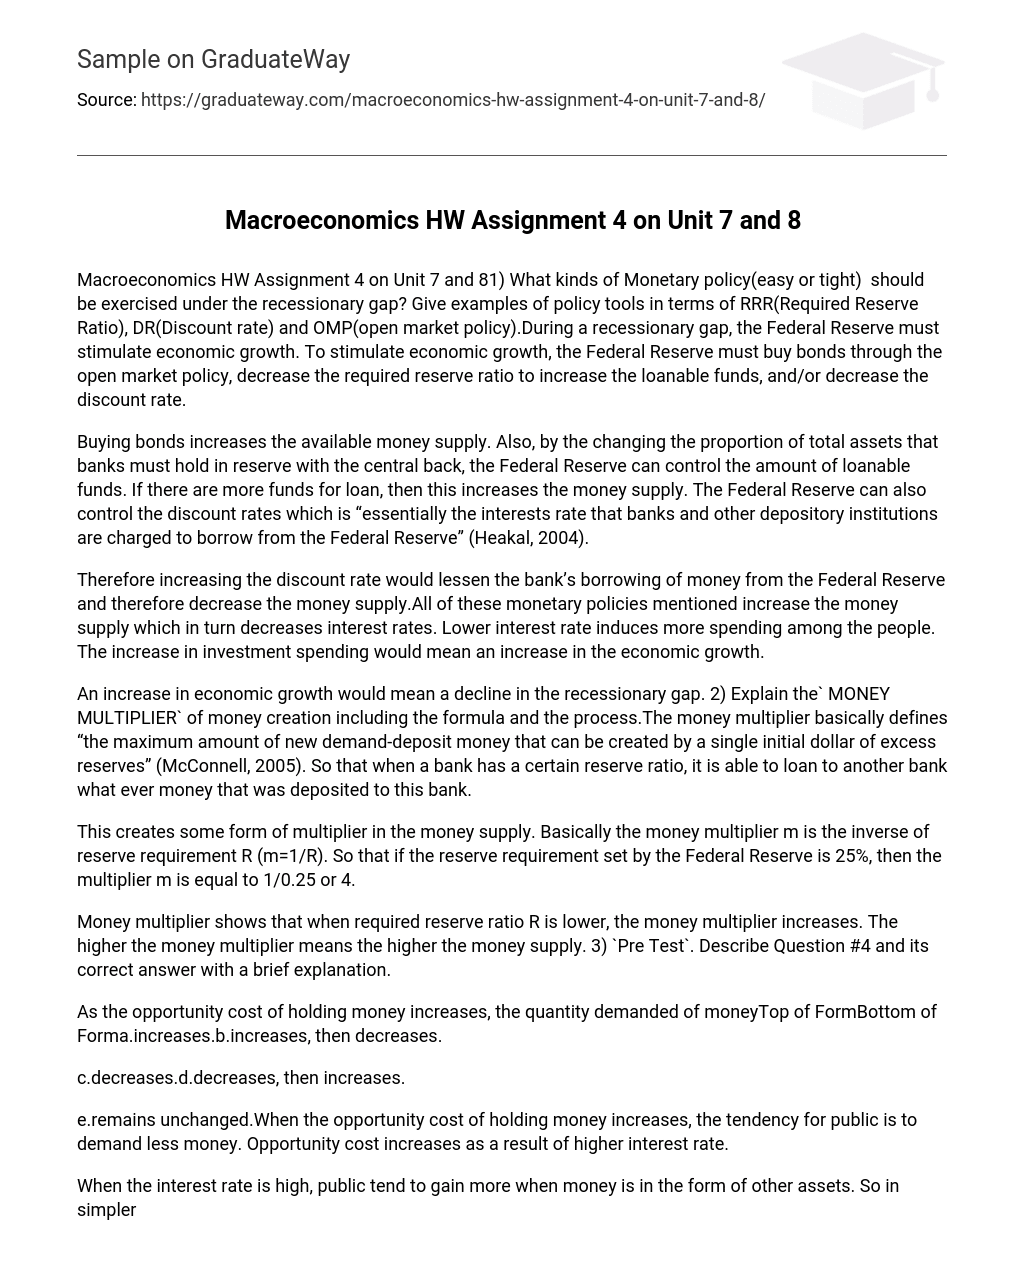 Macroeconomics HW Assignment 4 on Unit 7 and 8